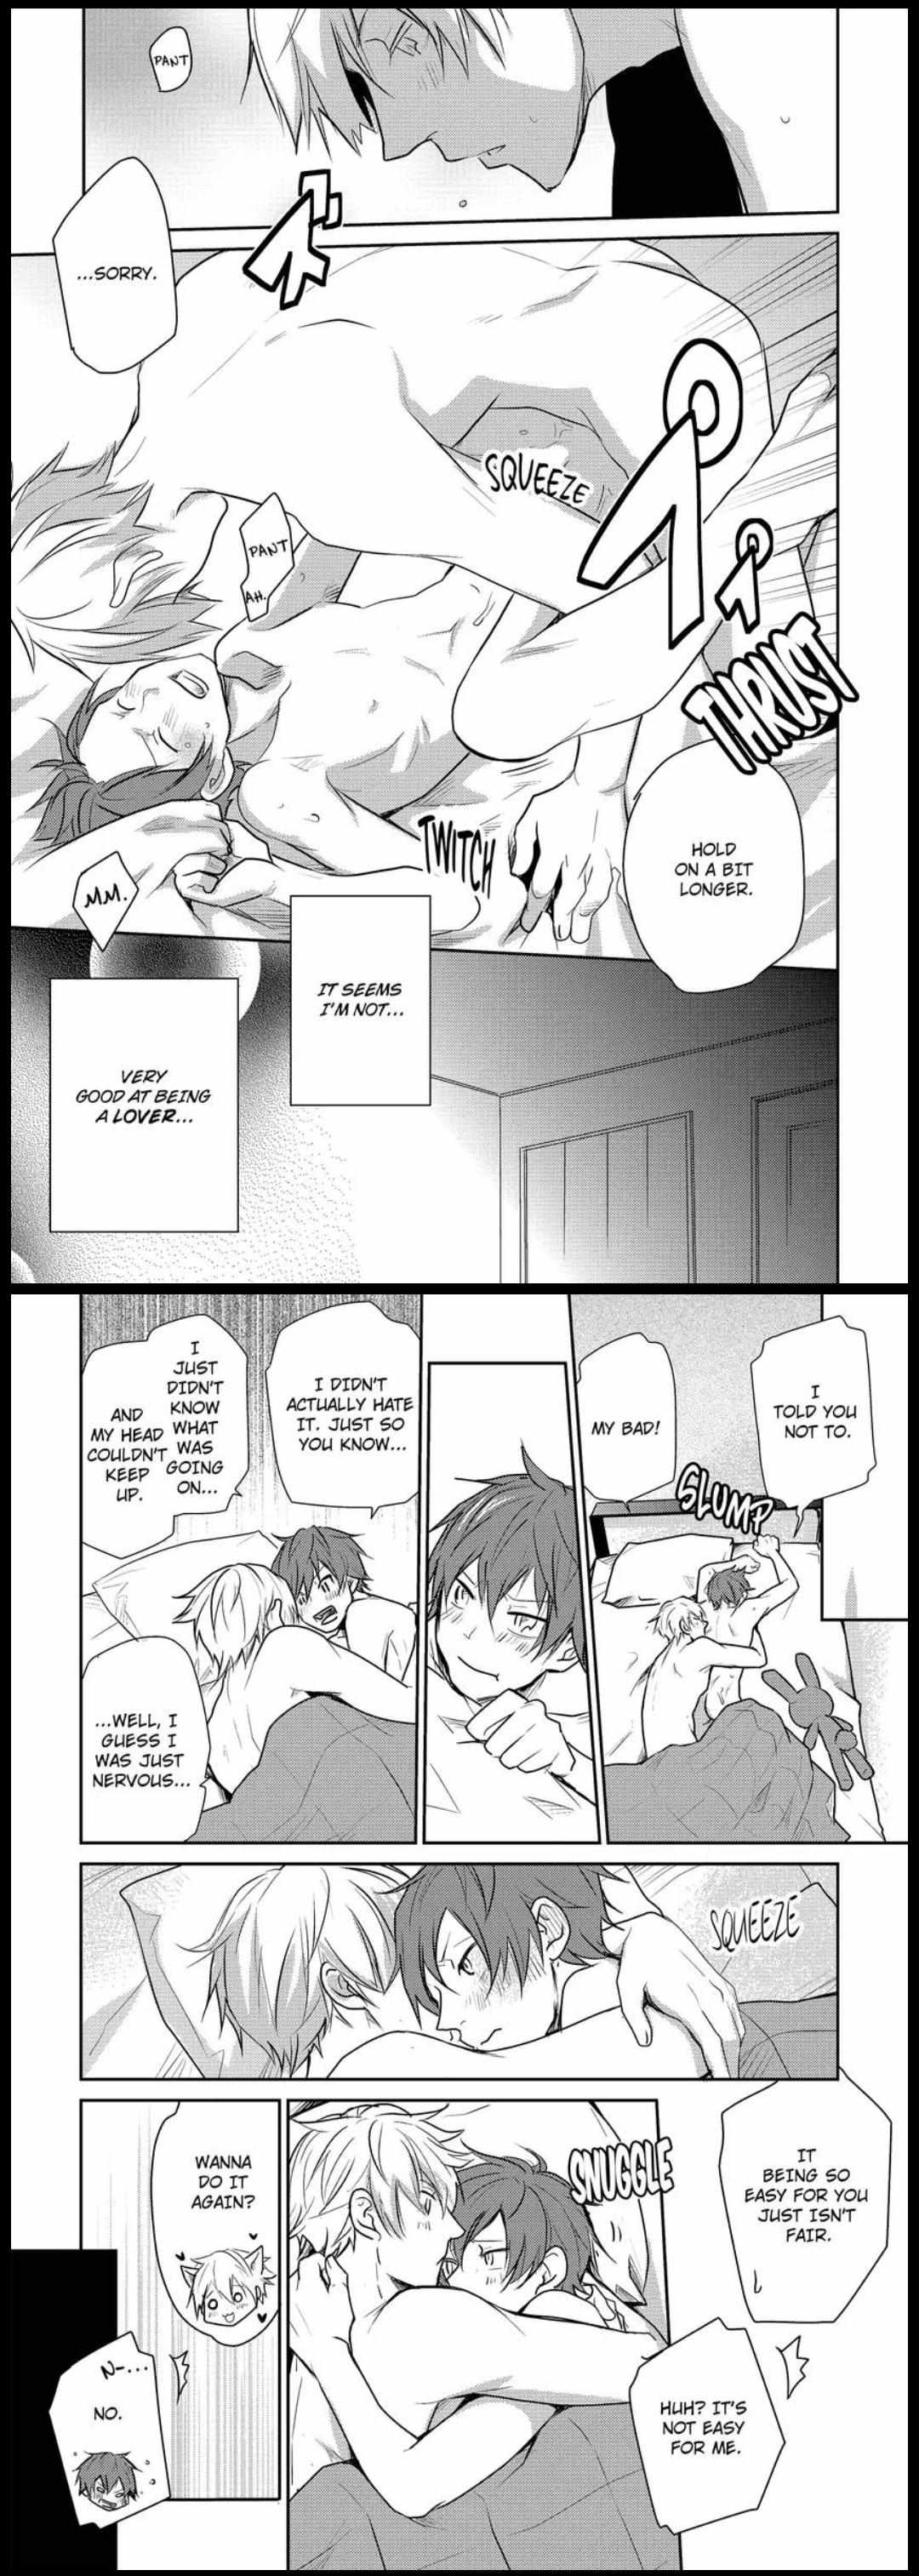 That's Too Much For an Introvert Like Me! - chapter 6 - #4